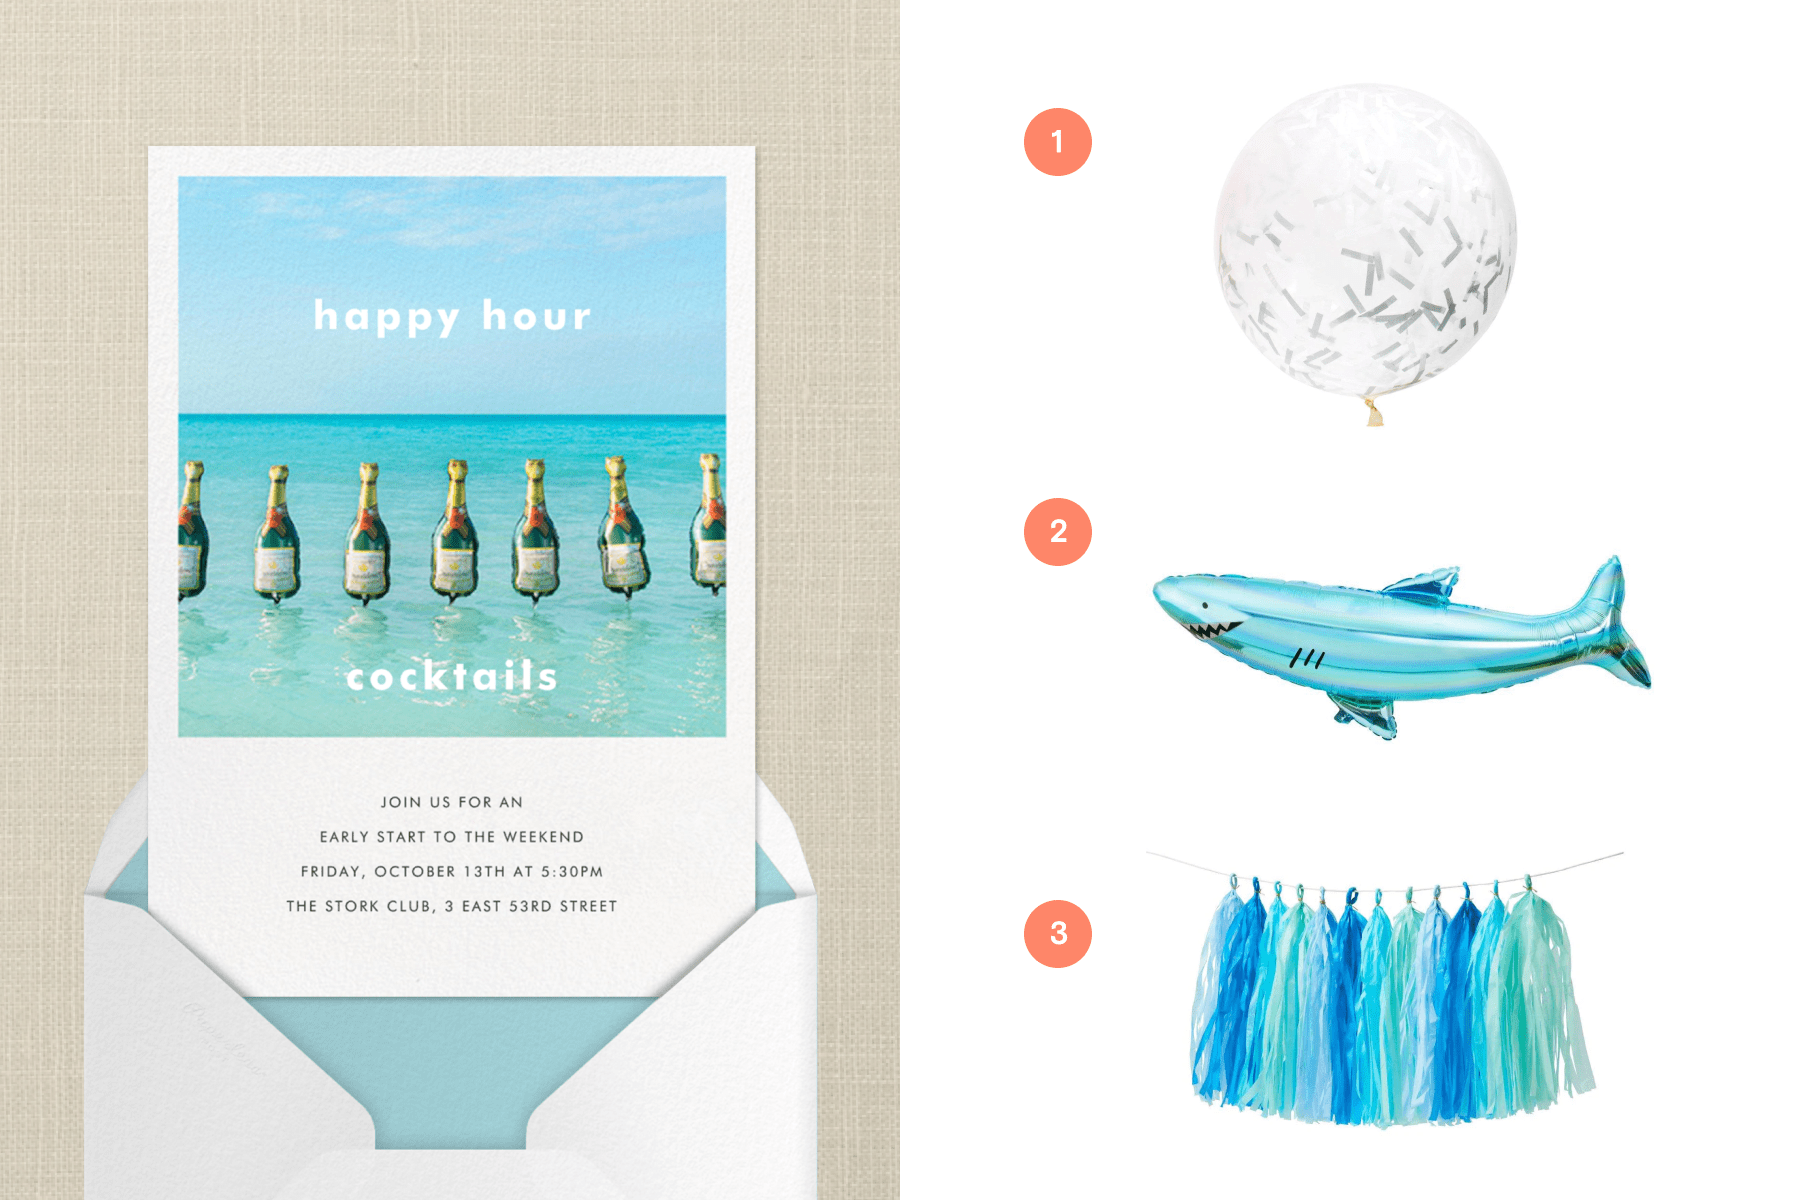 Left: An invitation with Champagne bottle balloons on the ocean. Right: A balloon with confetti inside, a shark-shaped balloon, a blue tassel garland. 